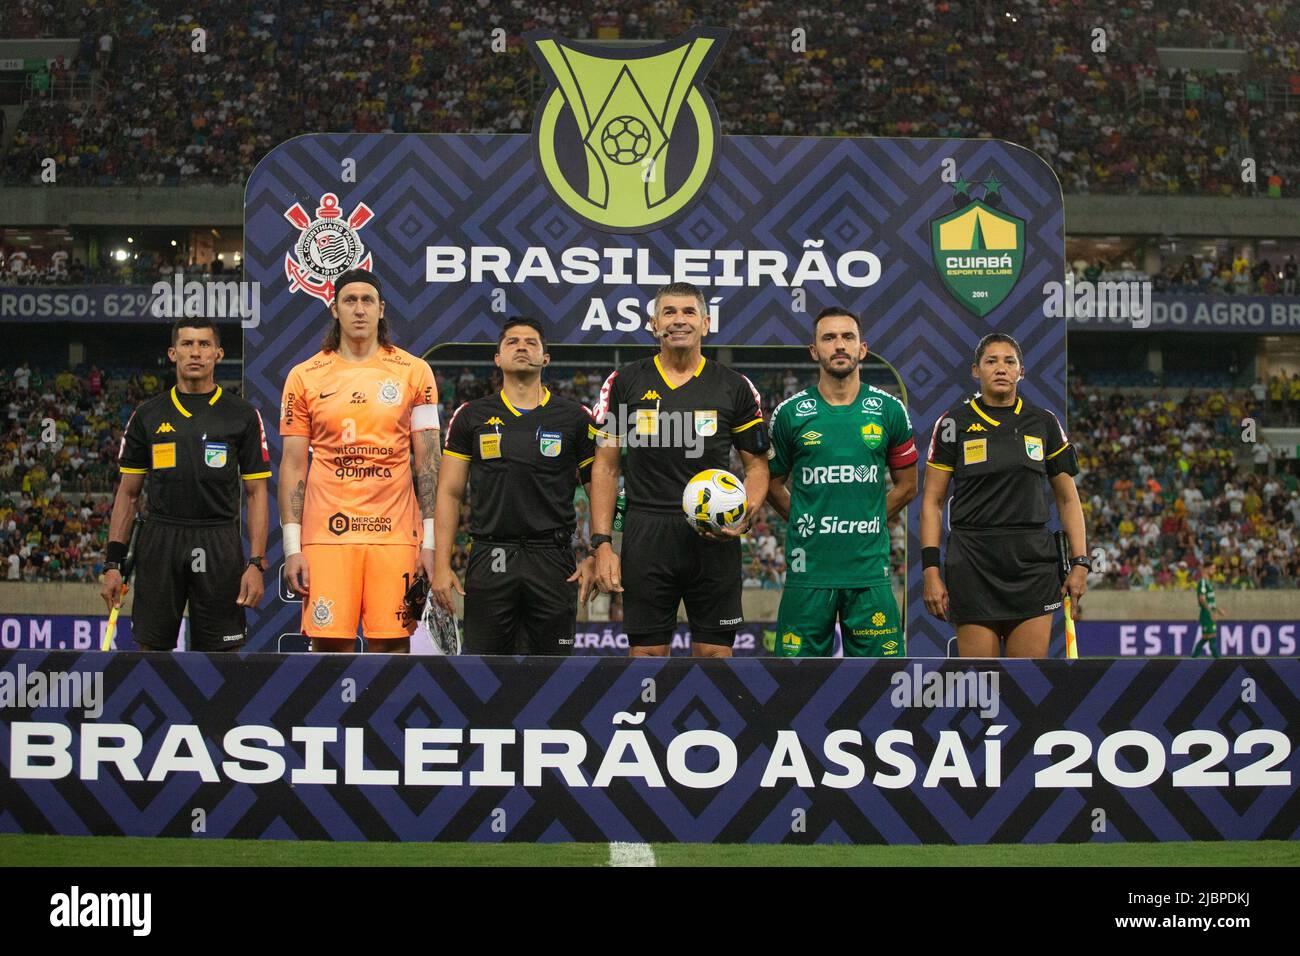 Cuiaba, Brazil. 07th June, 2022. MT - Cuiaba - 06/07/2022 - BRAZILIAN A 2022, CUIABA X CORINTHIANS - Players from Cuiaba and Corinthians pose for photos next to the referee before the match at the Arena Pantanal stadium for the Brazilian championship A 2022. Photo: Gil Gomes/AGIF/Sipa USA Credit: Sipa USA/Alamy Live News Stock Photo